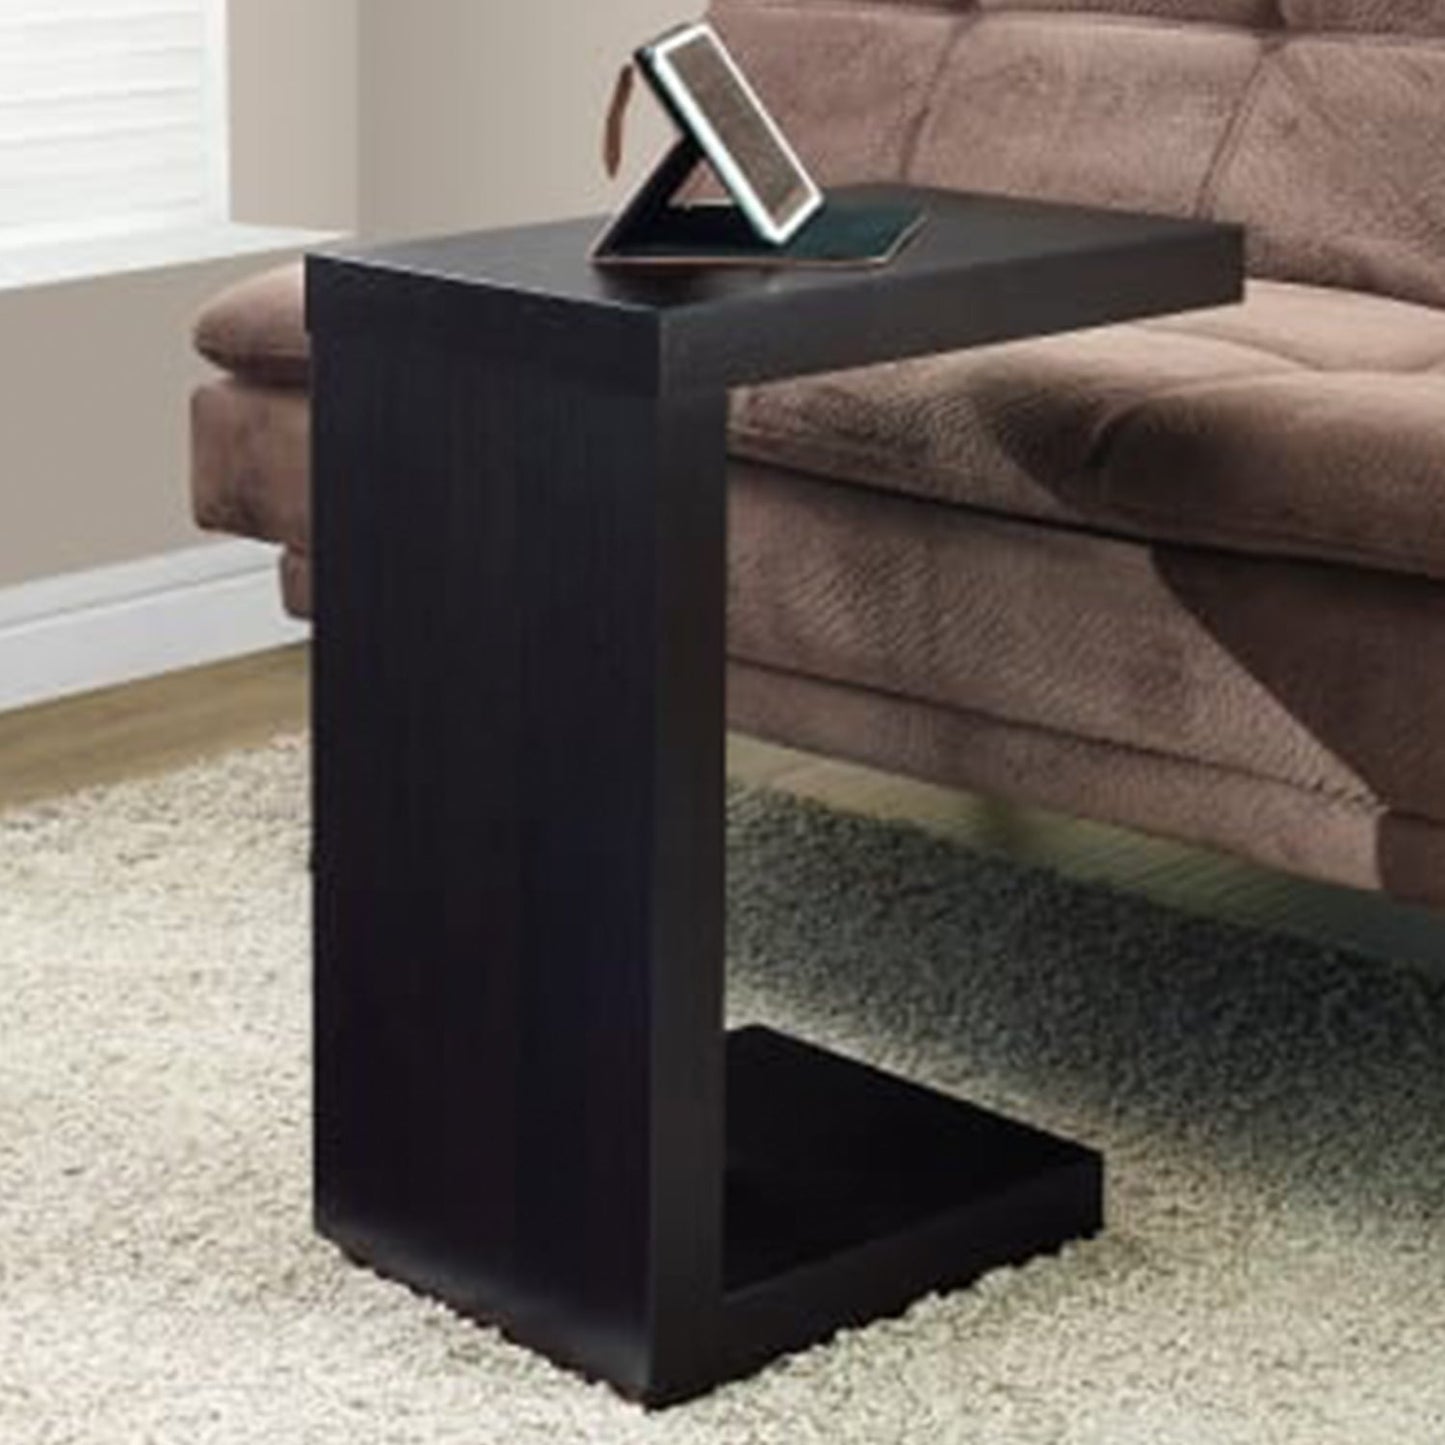 HomeRoots 11.5" x 18" x 24" Hollow Core Particle Board Accent Table in Cappuccino Finish